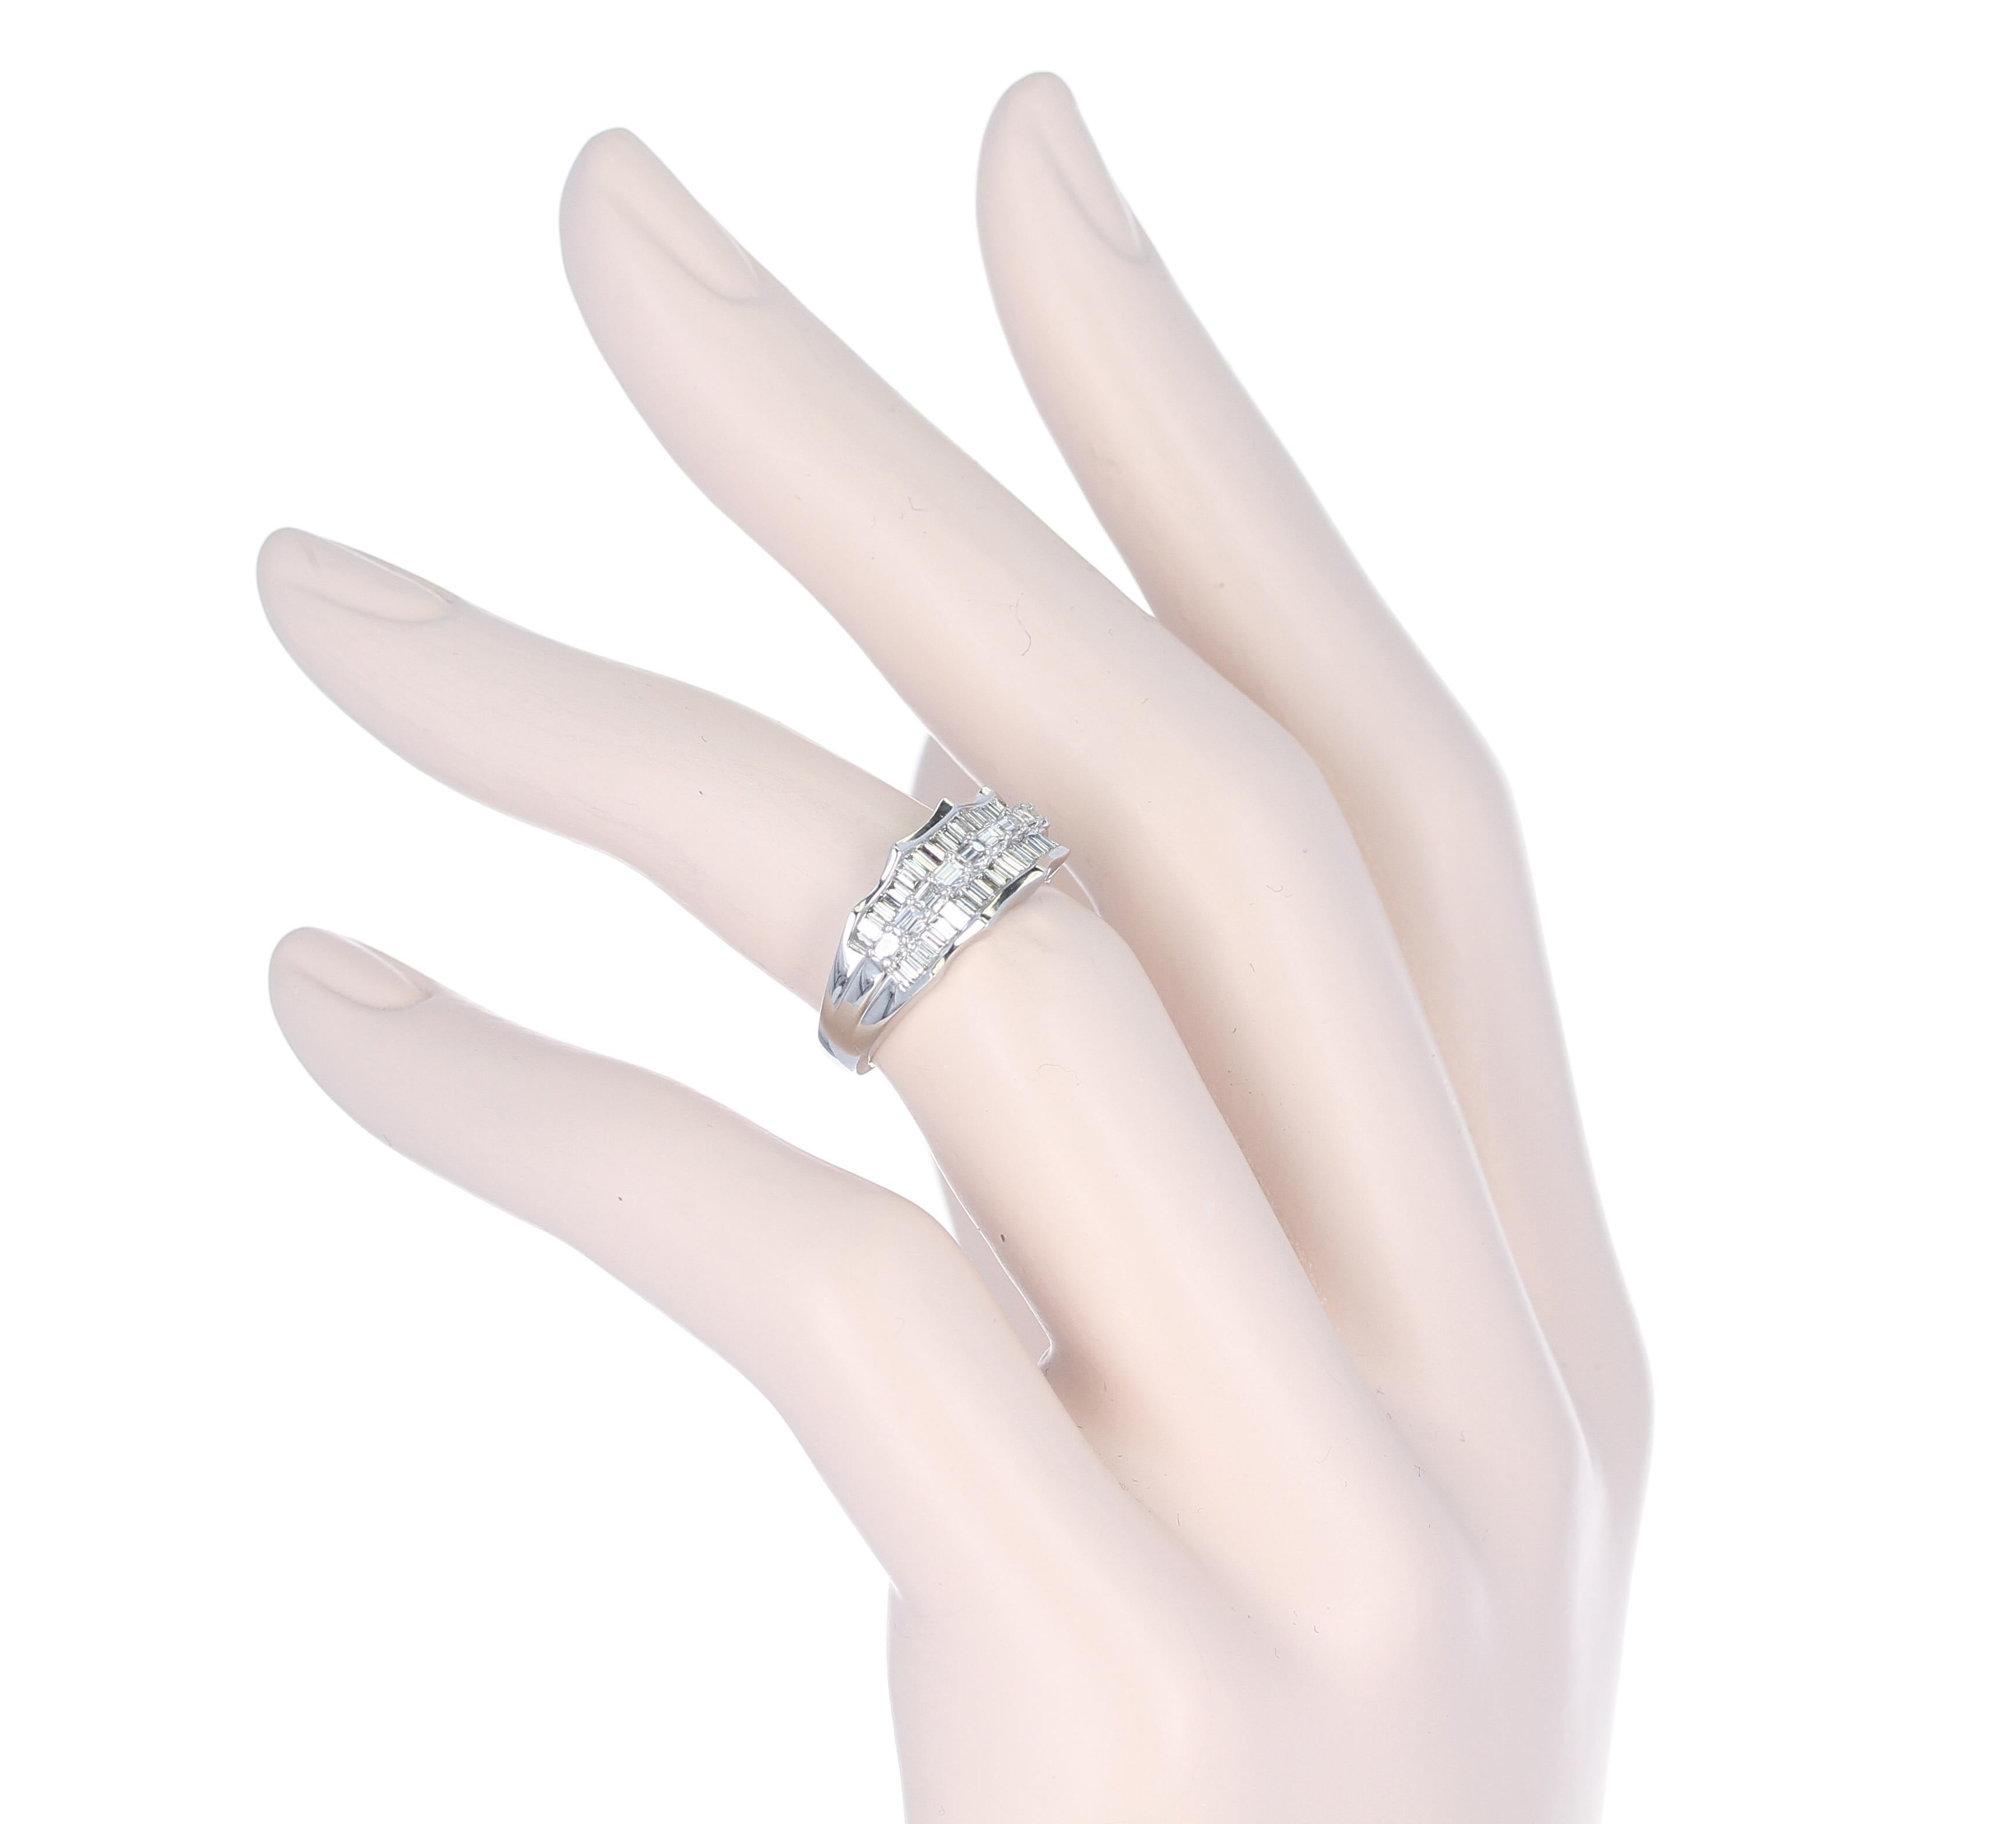 Wavy Row Platinum 1 Carat Baguette Diamond Bridal Ring In Excellent Condition For Sale In New York, NY